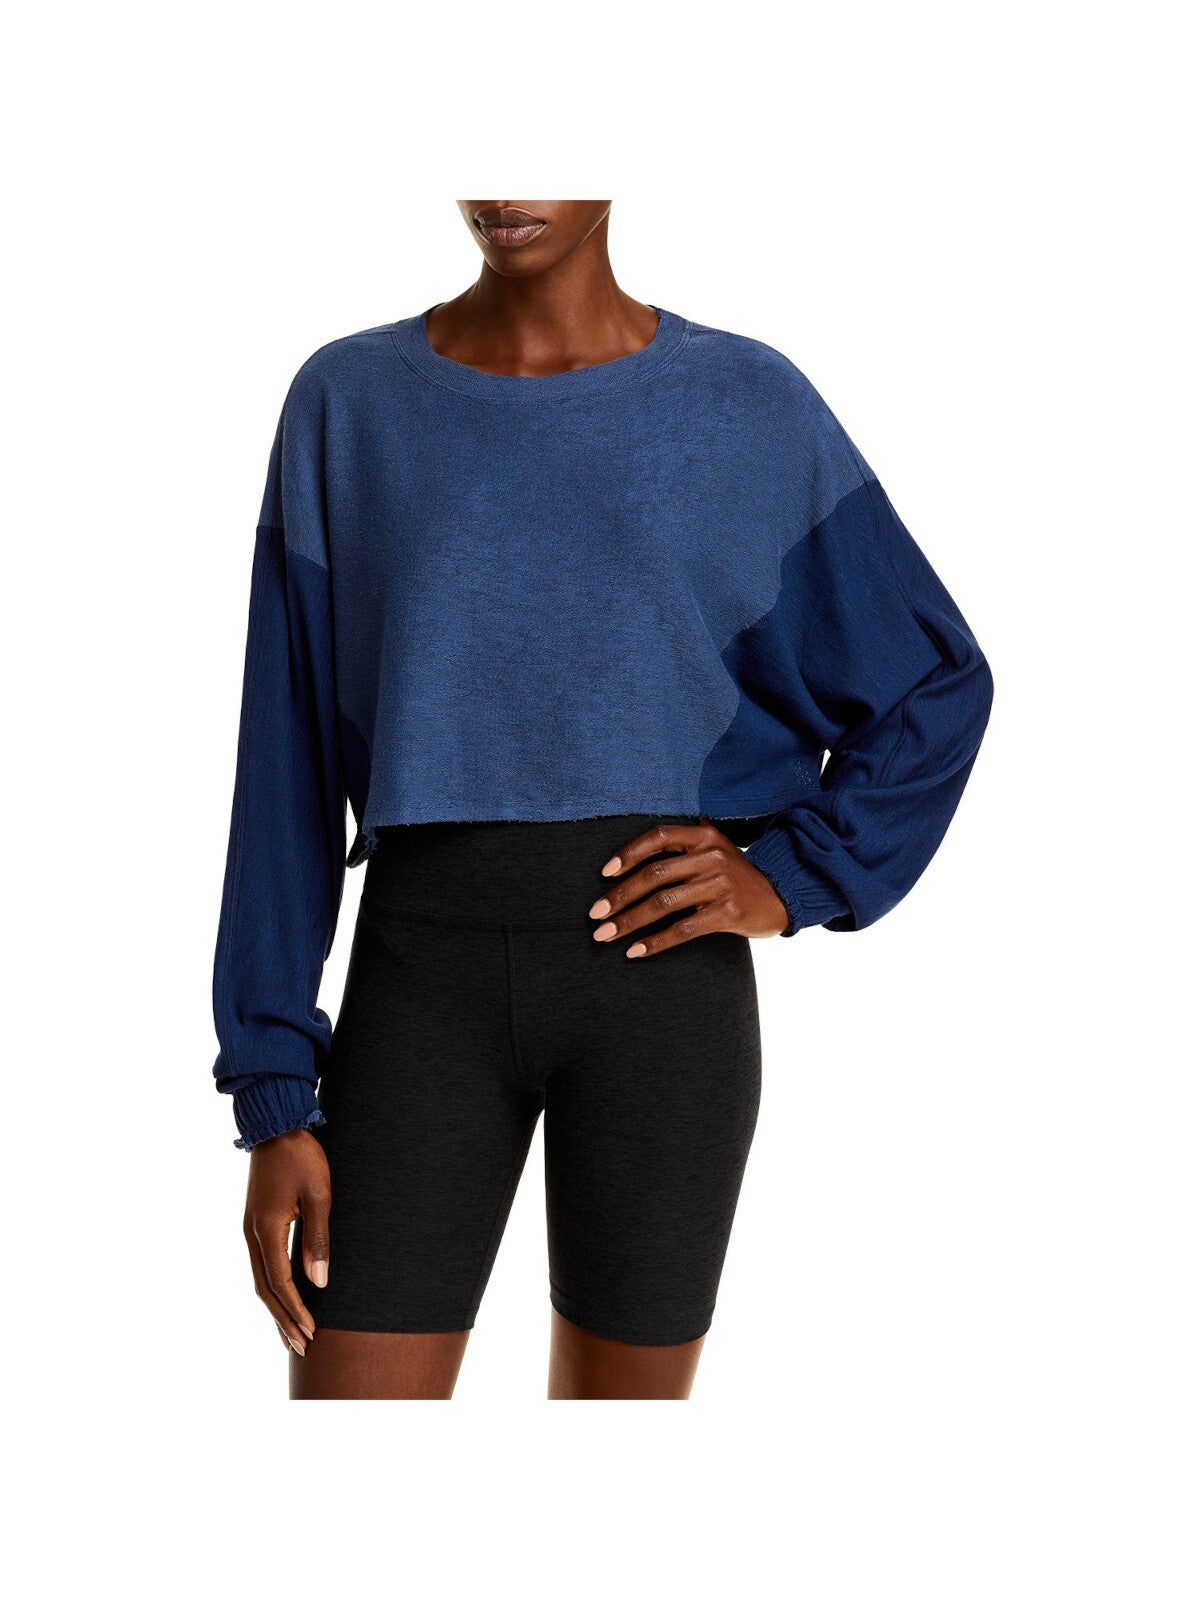 FP MOVEMENT Womens Navy Stretch Color Block Long Sleeve Jewel Neck Crop Top XS